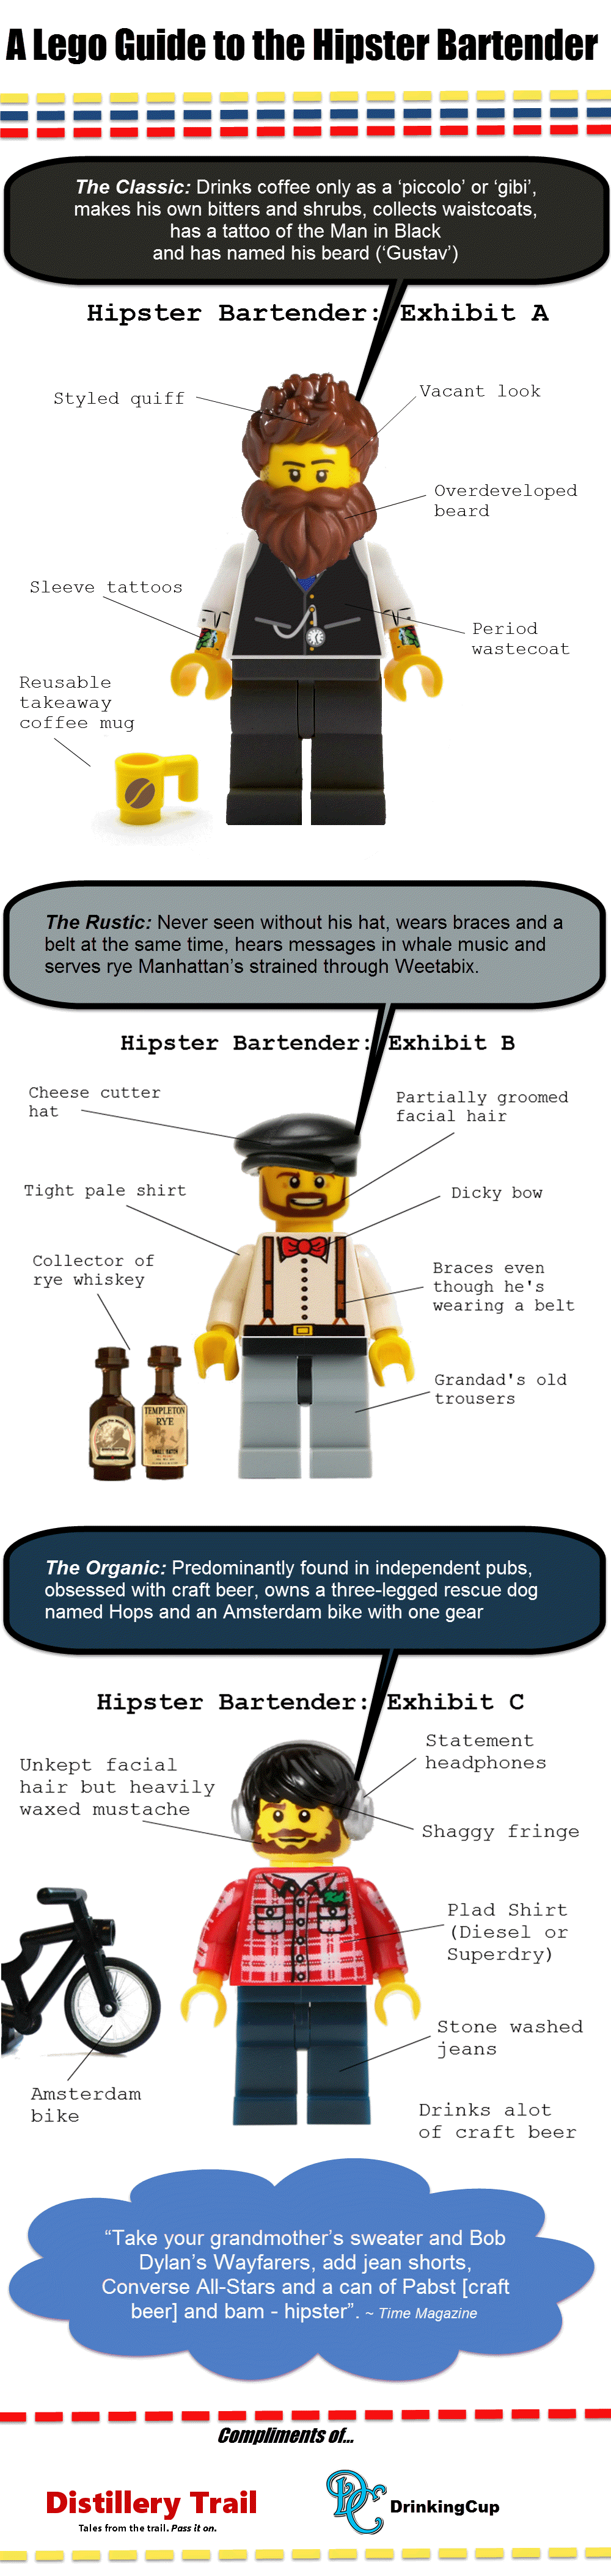 A Lego Guide to the Hipster Bartender Infographic b